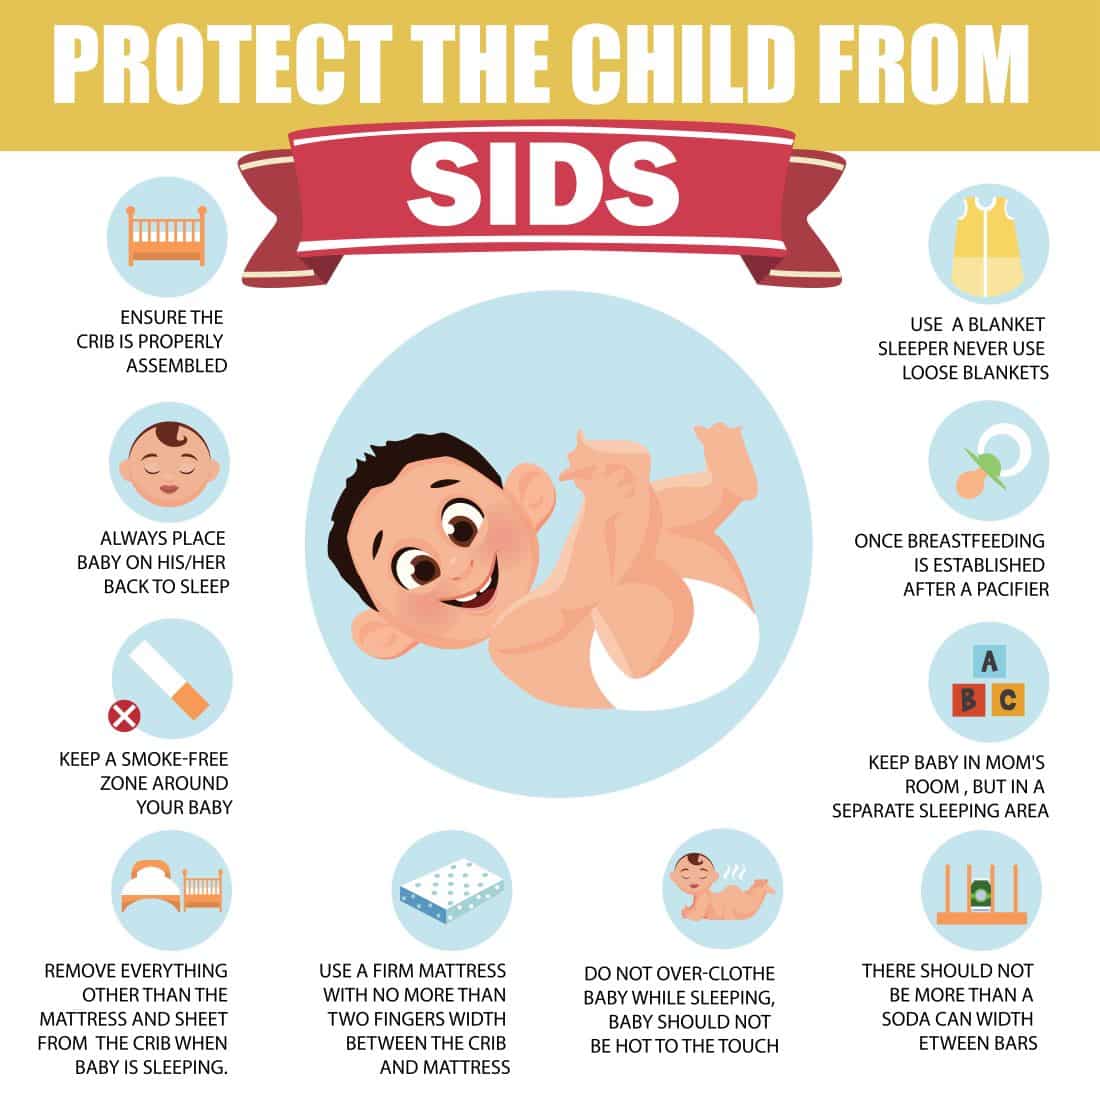 SIDS and sudden infant death syndrome